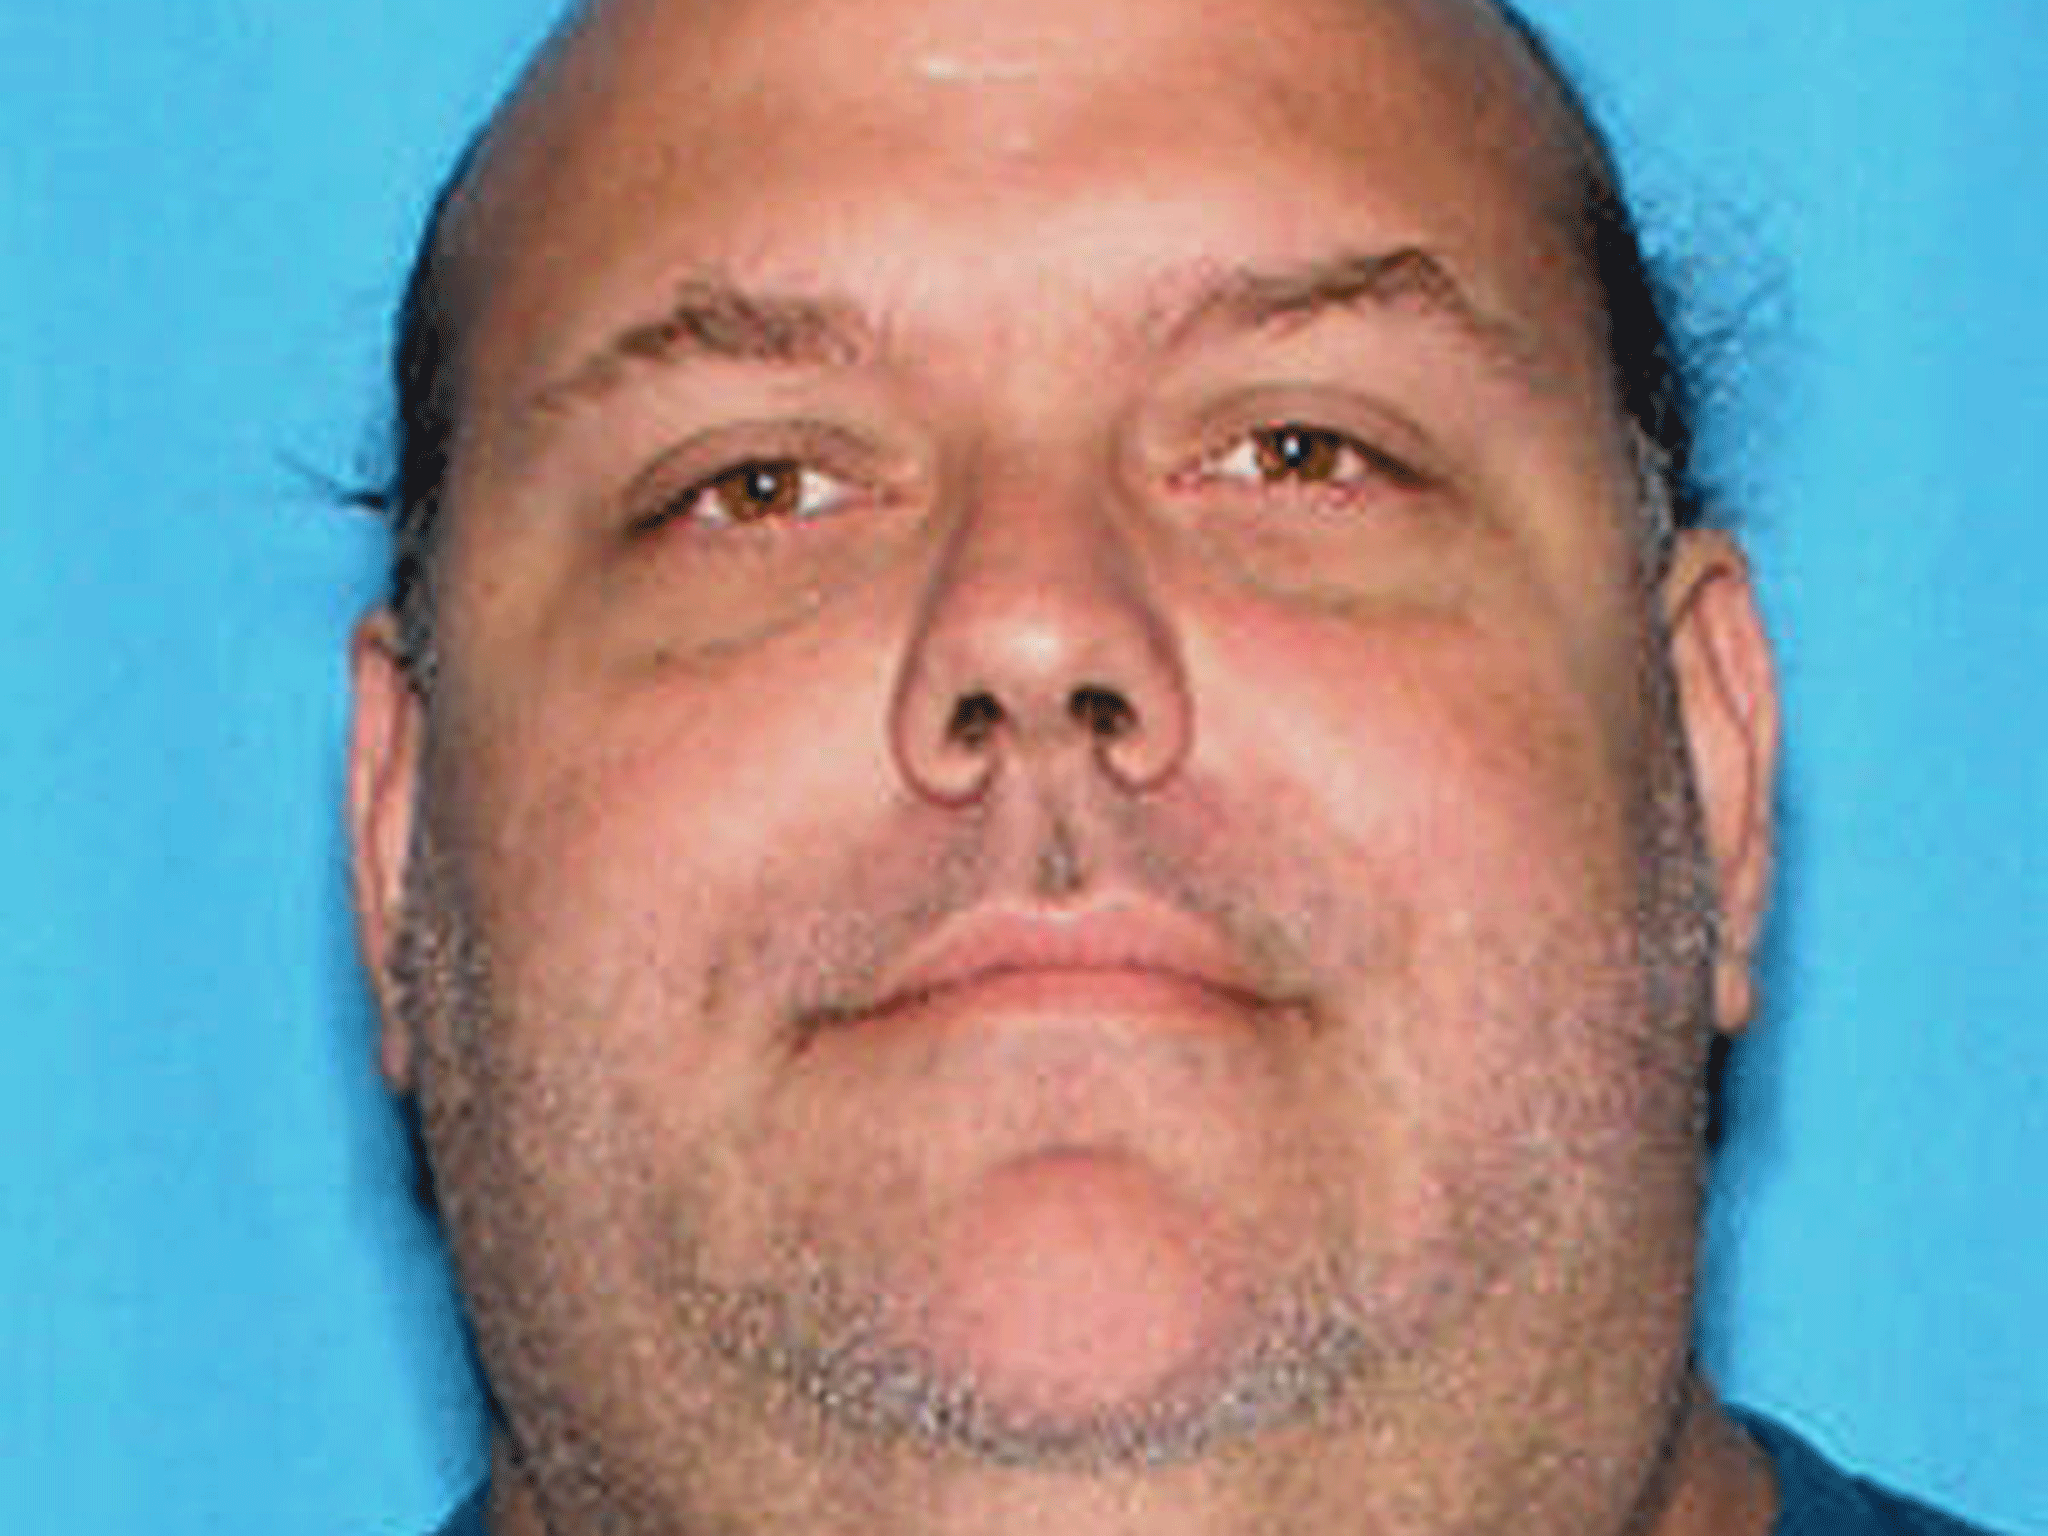 Convicted sex offender Timothy Poole has reportedly won $3 million on the lottery